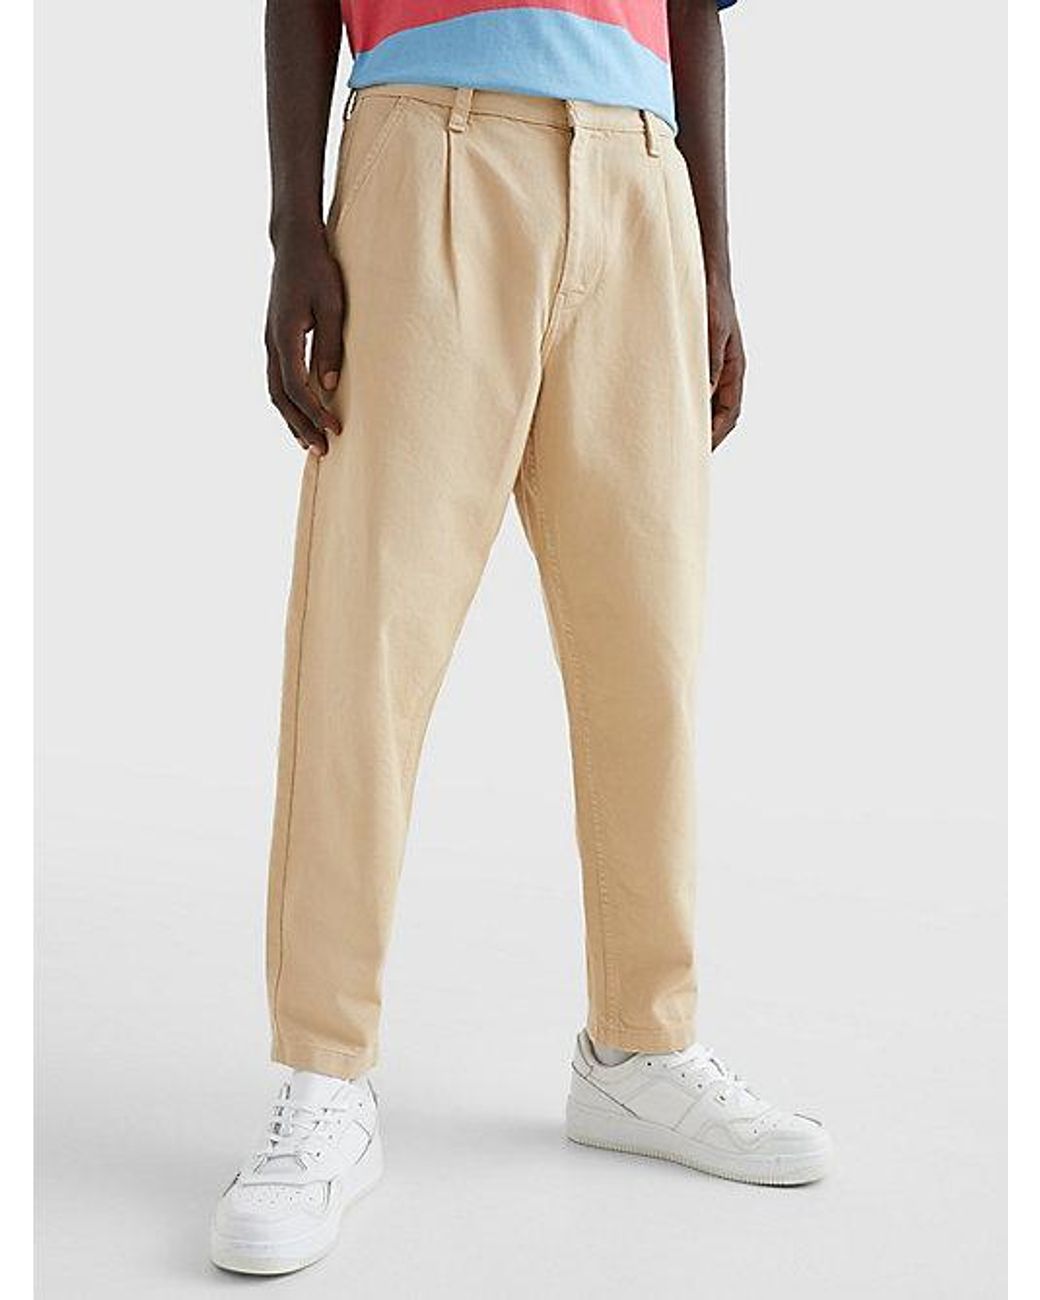 Tommy Hilfiger Bax Tapered Fit Garment-dyed Chino in het Naturel voor heren  | Lyst NL